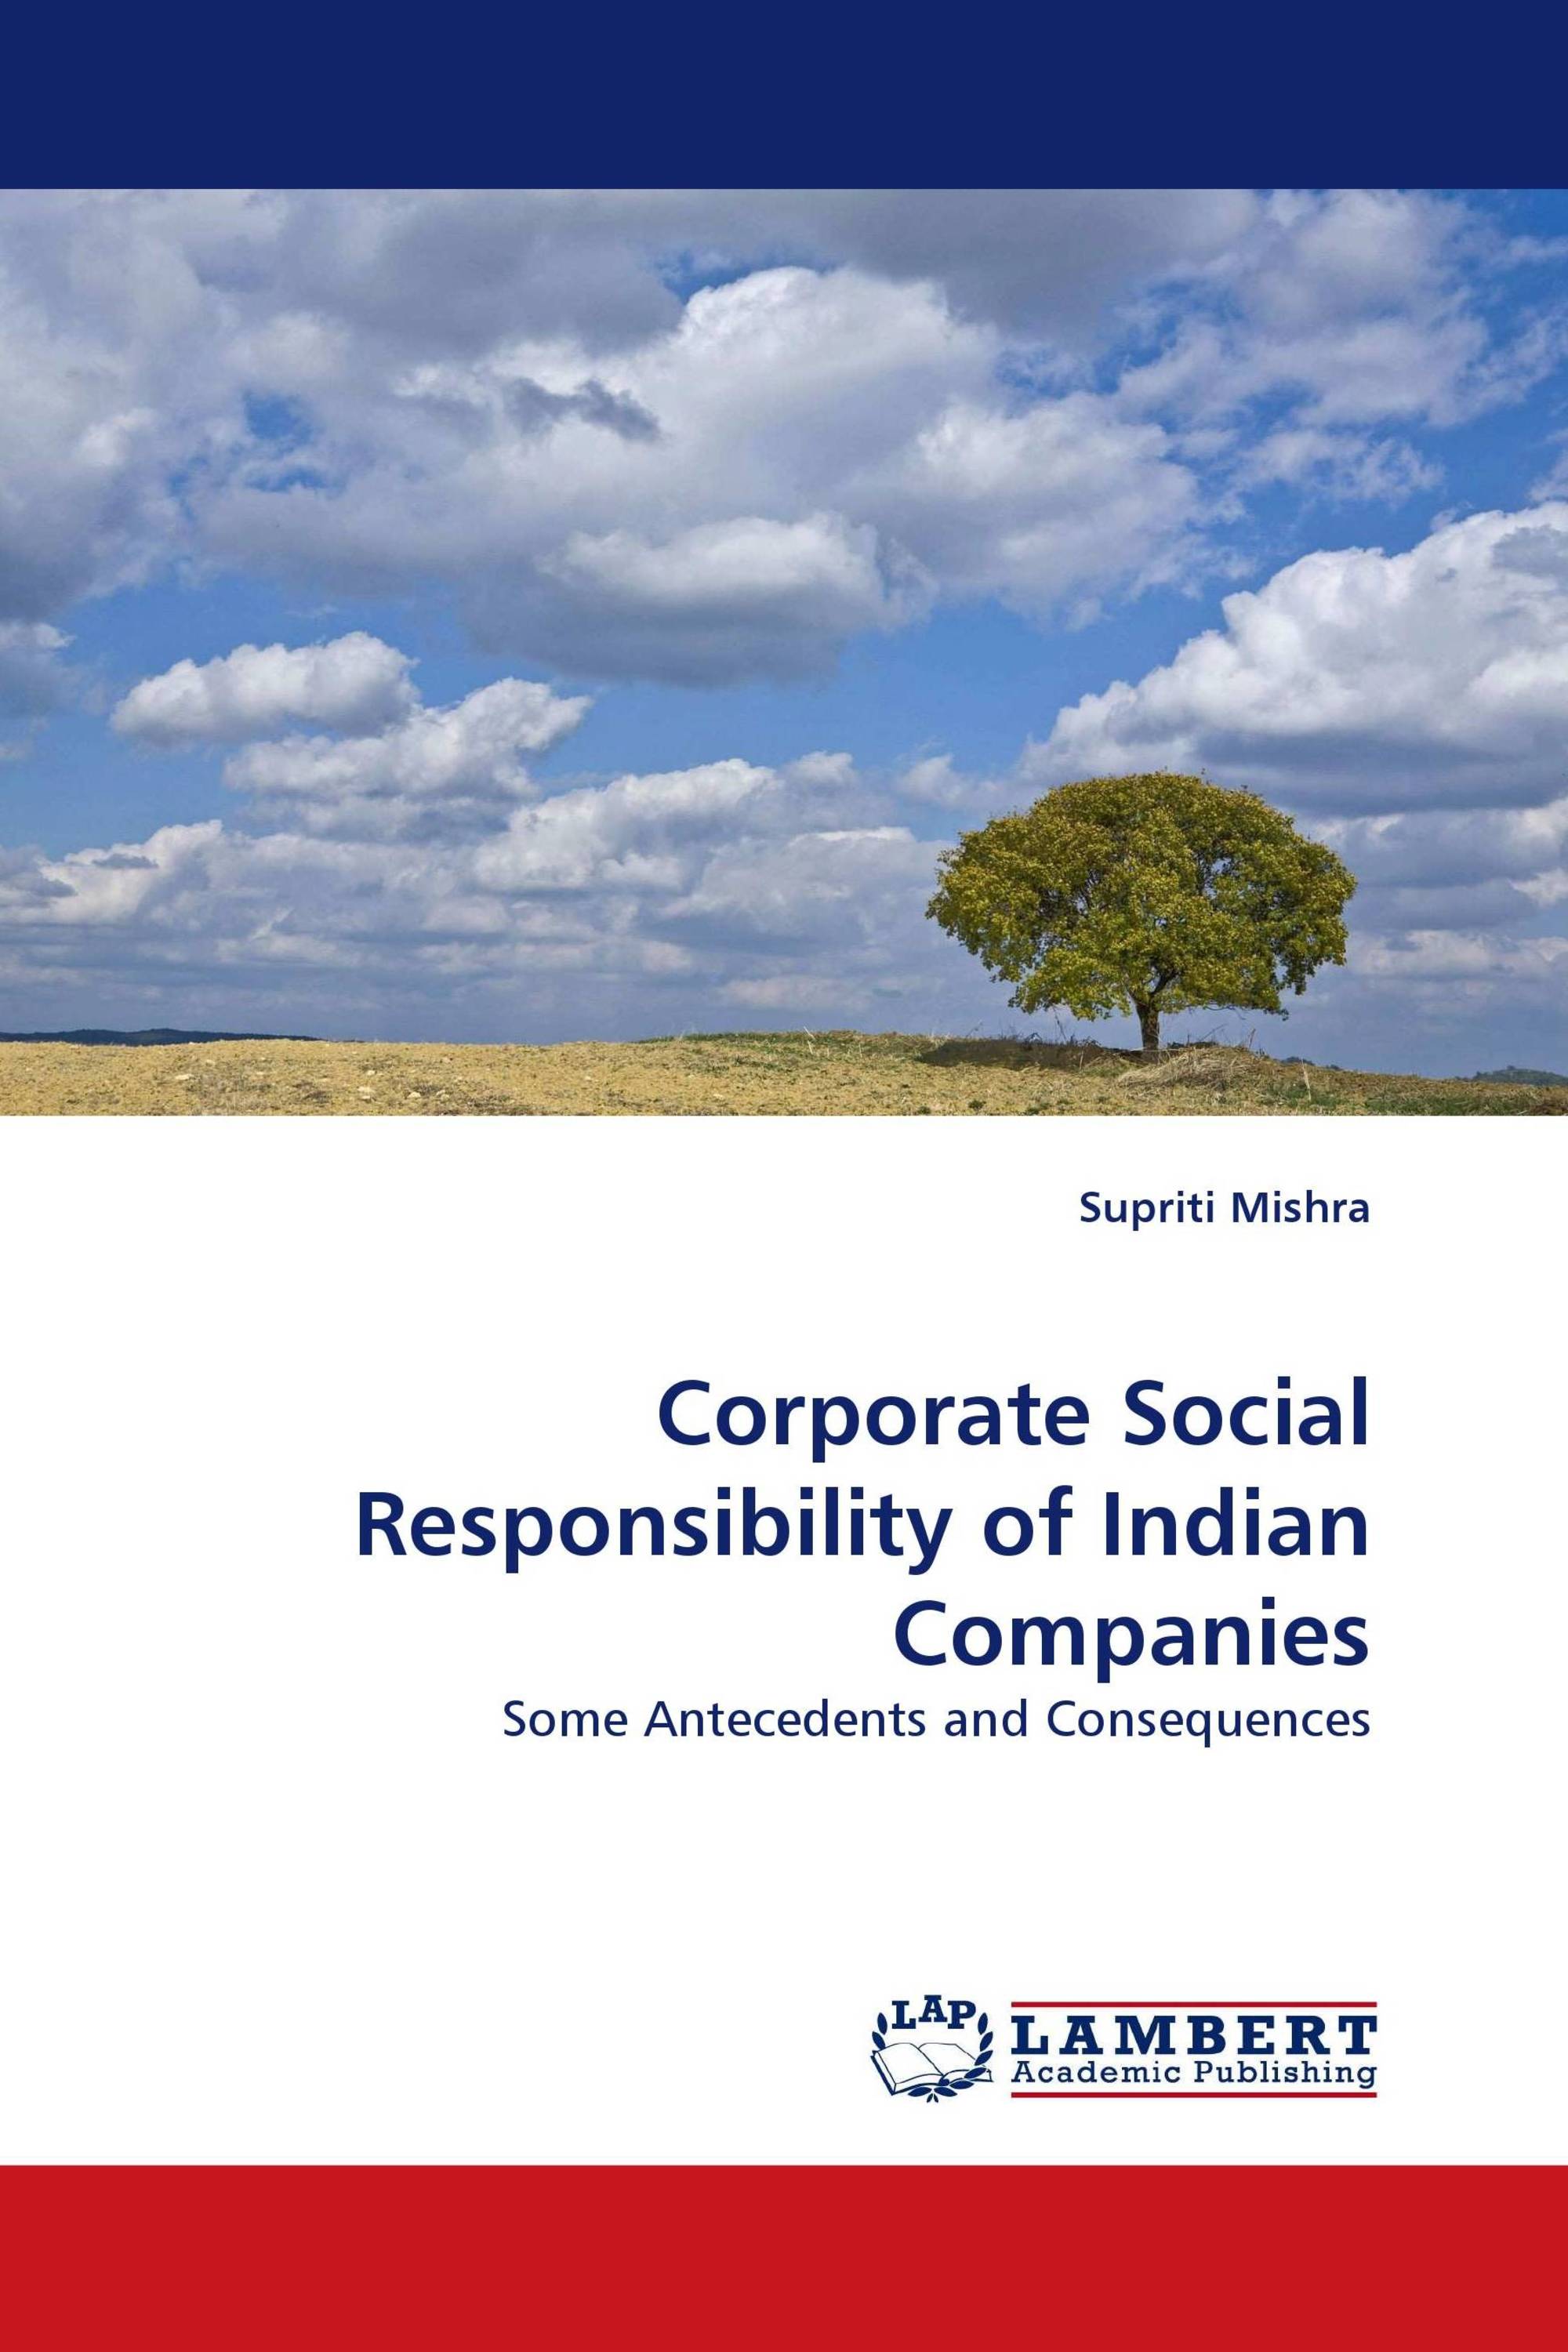 Corporate Social Responsibility of Indian Companies